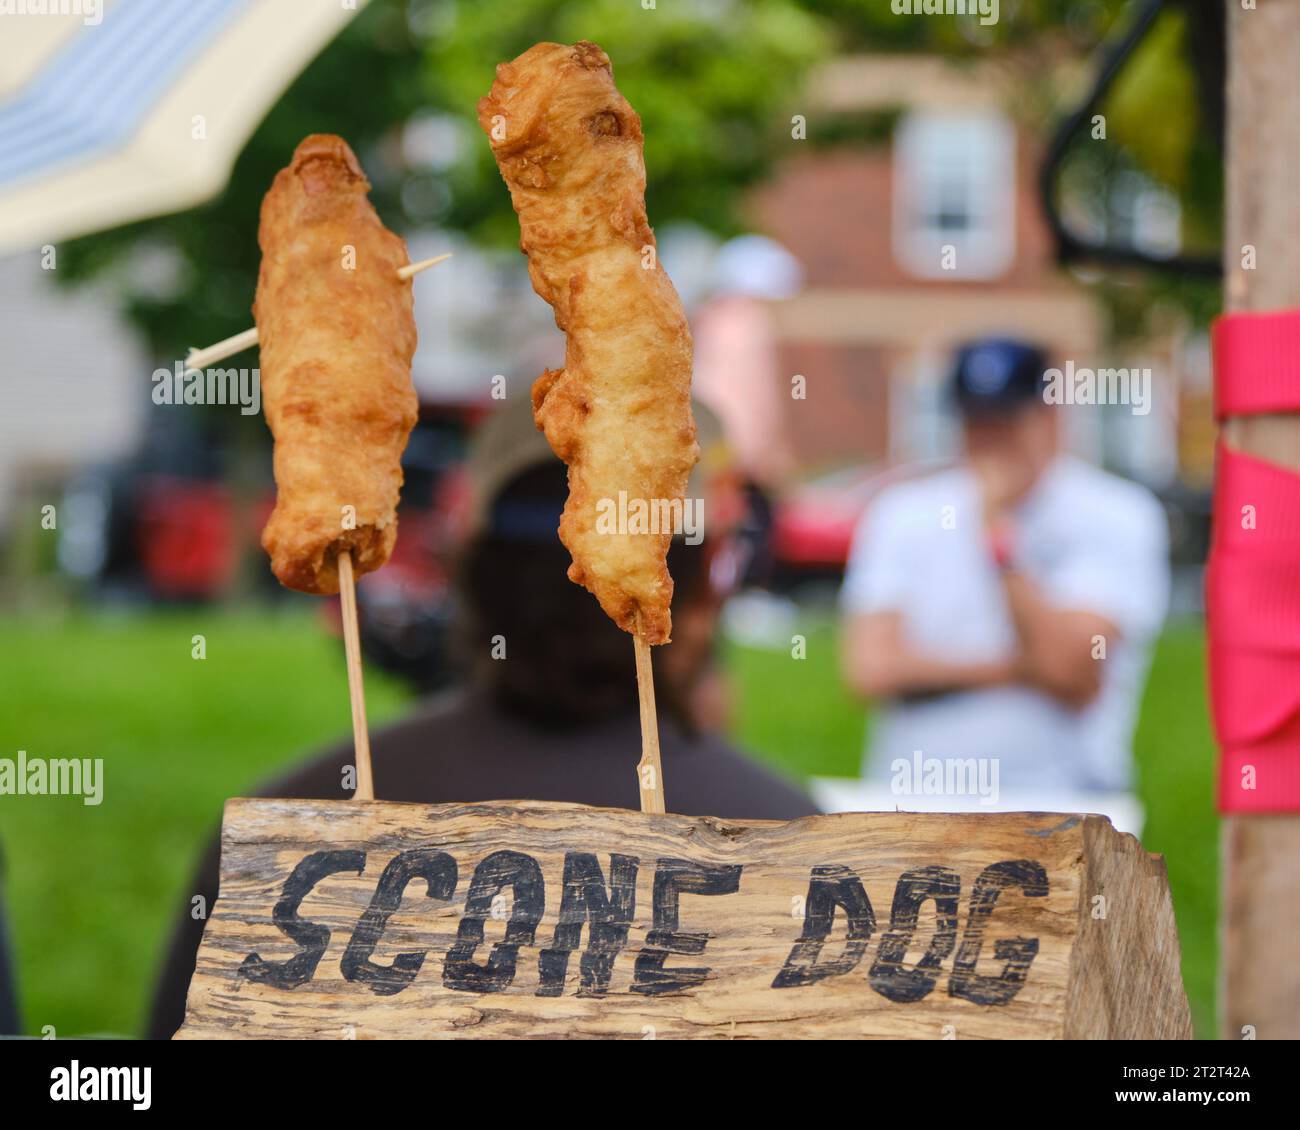 Scone Dogs, sausage wrapped in Bannock fried, on display to be picked up Stock Photo